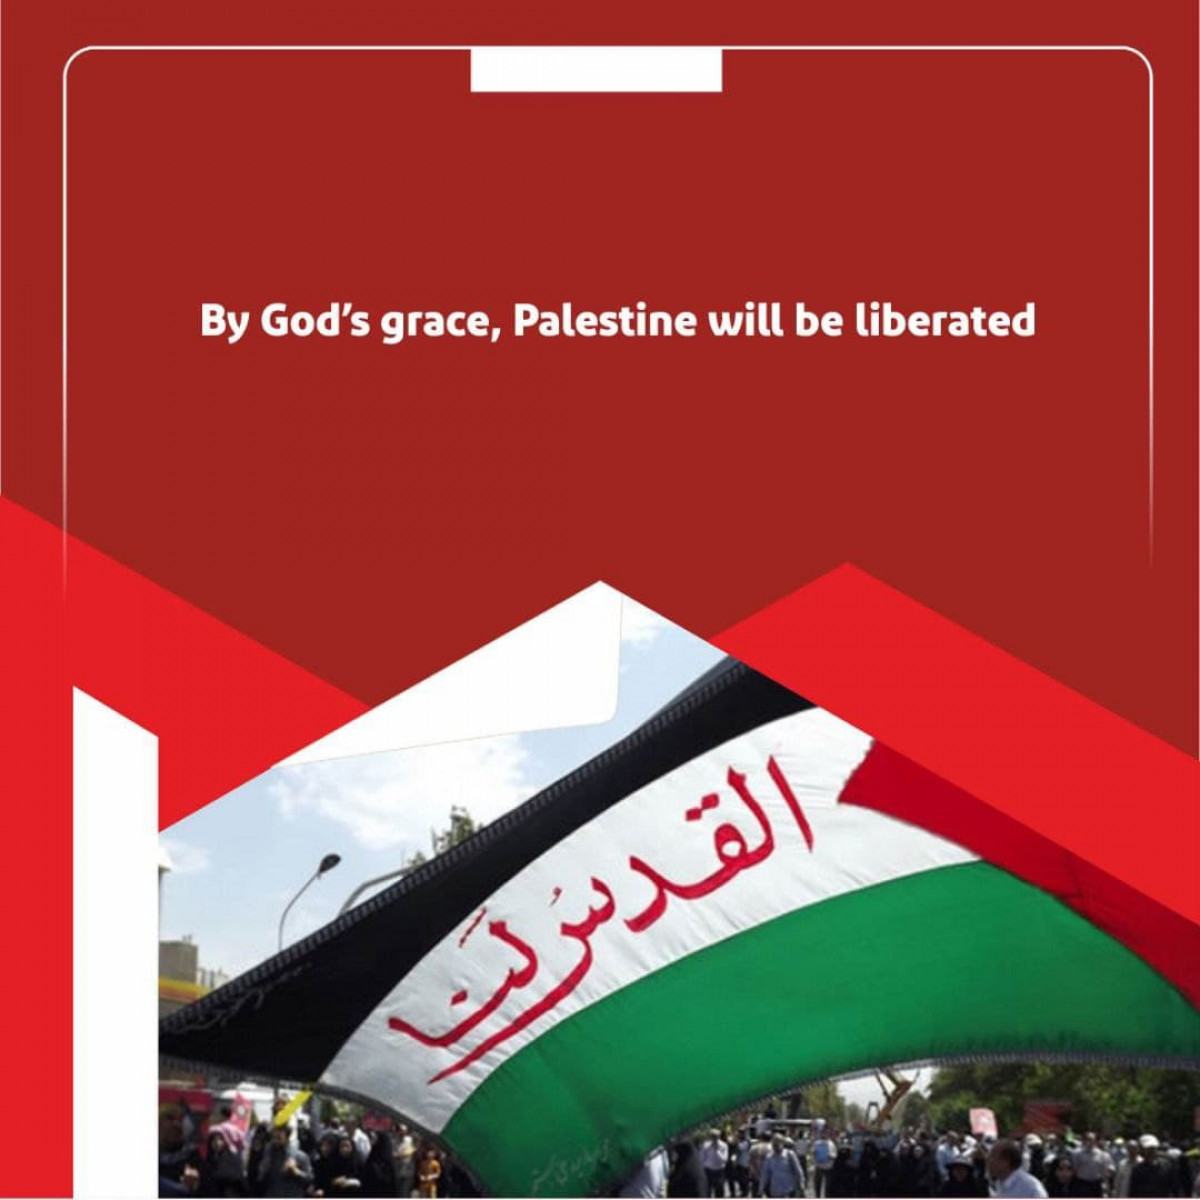 By God's grace, Palestine will be liberated